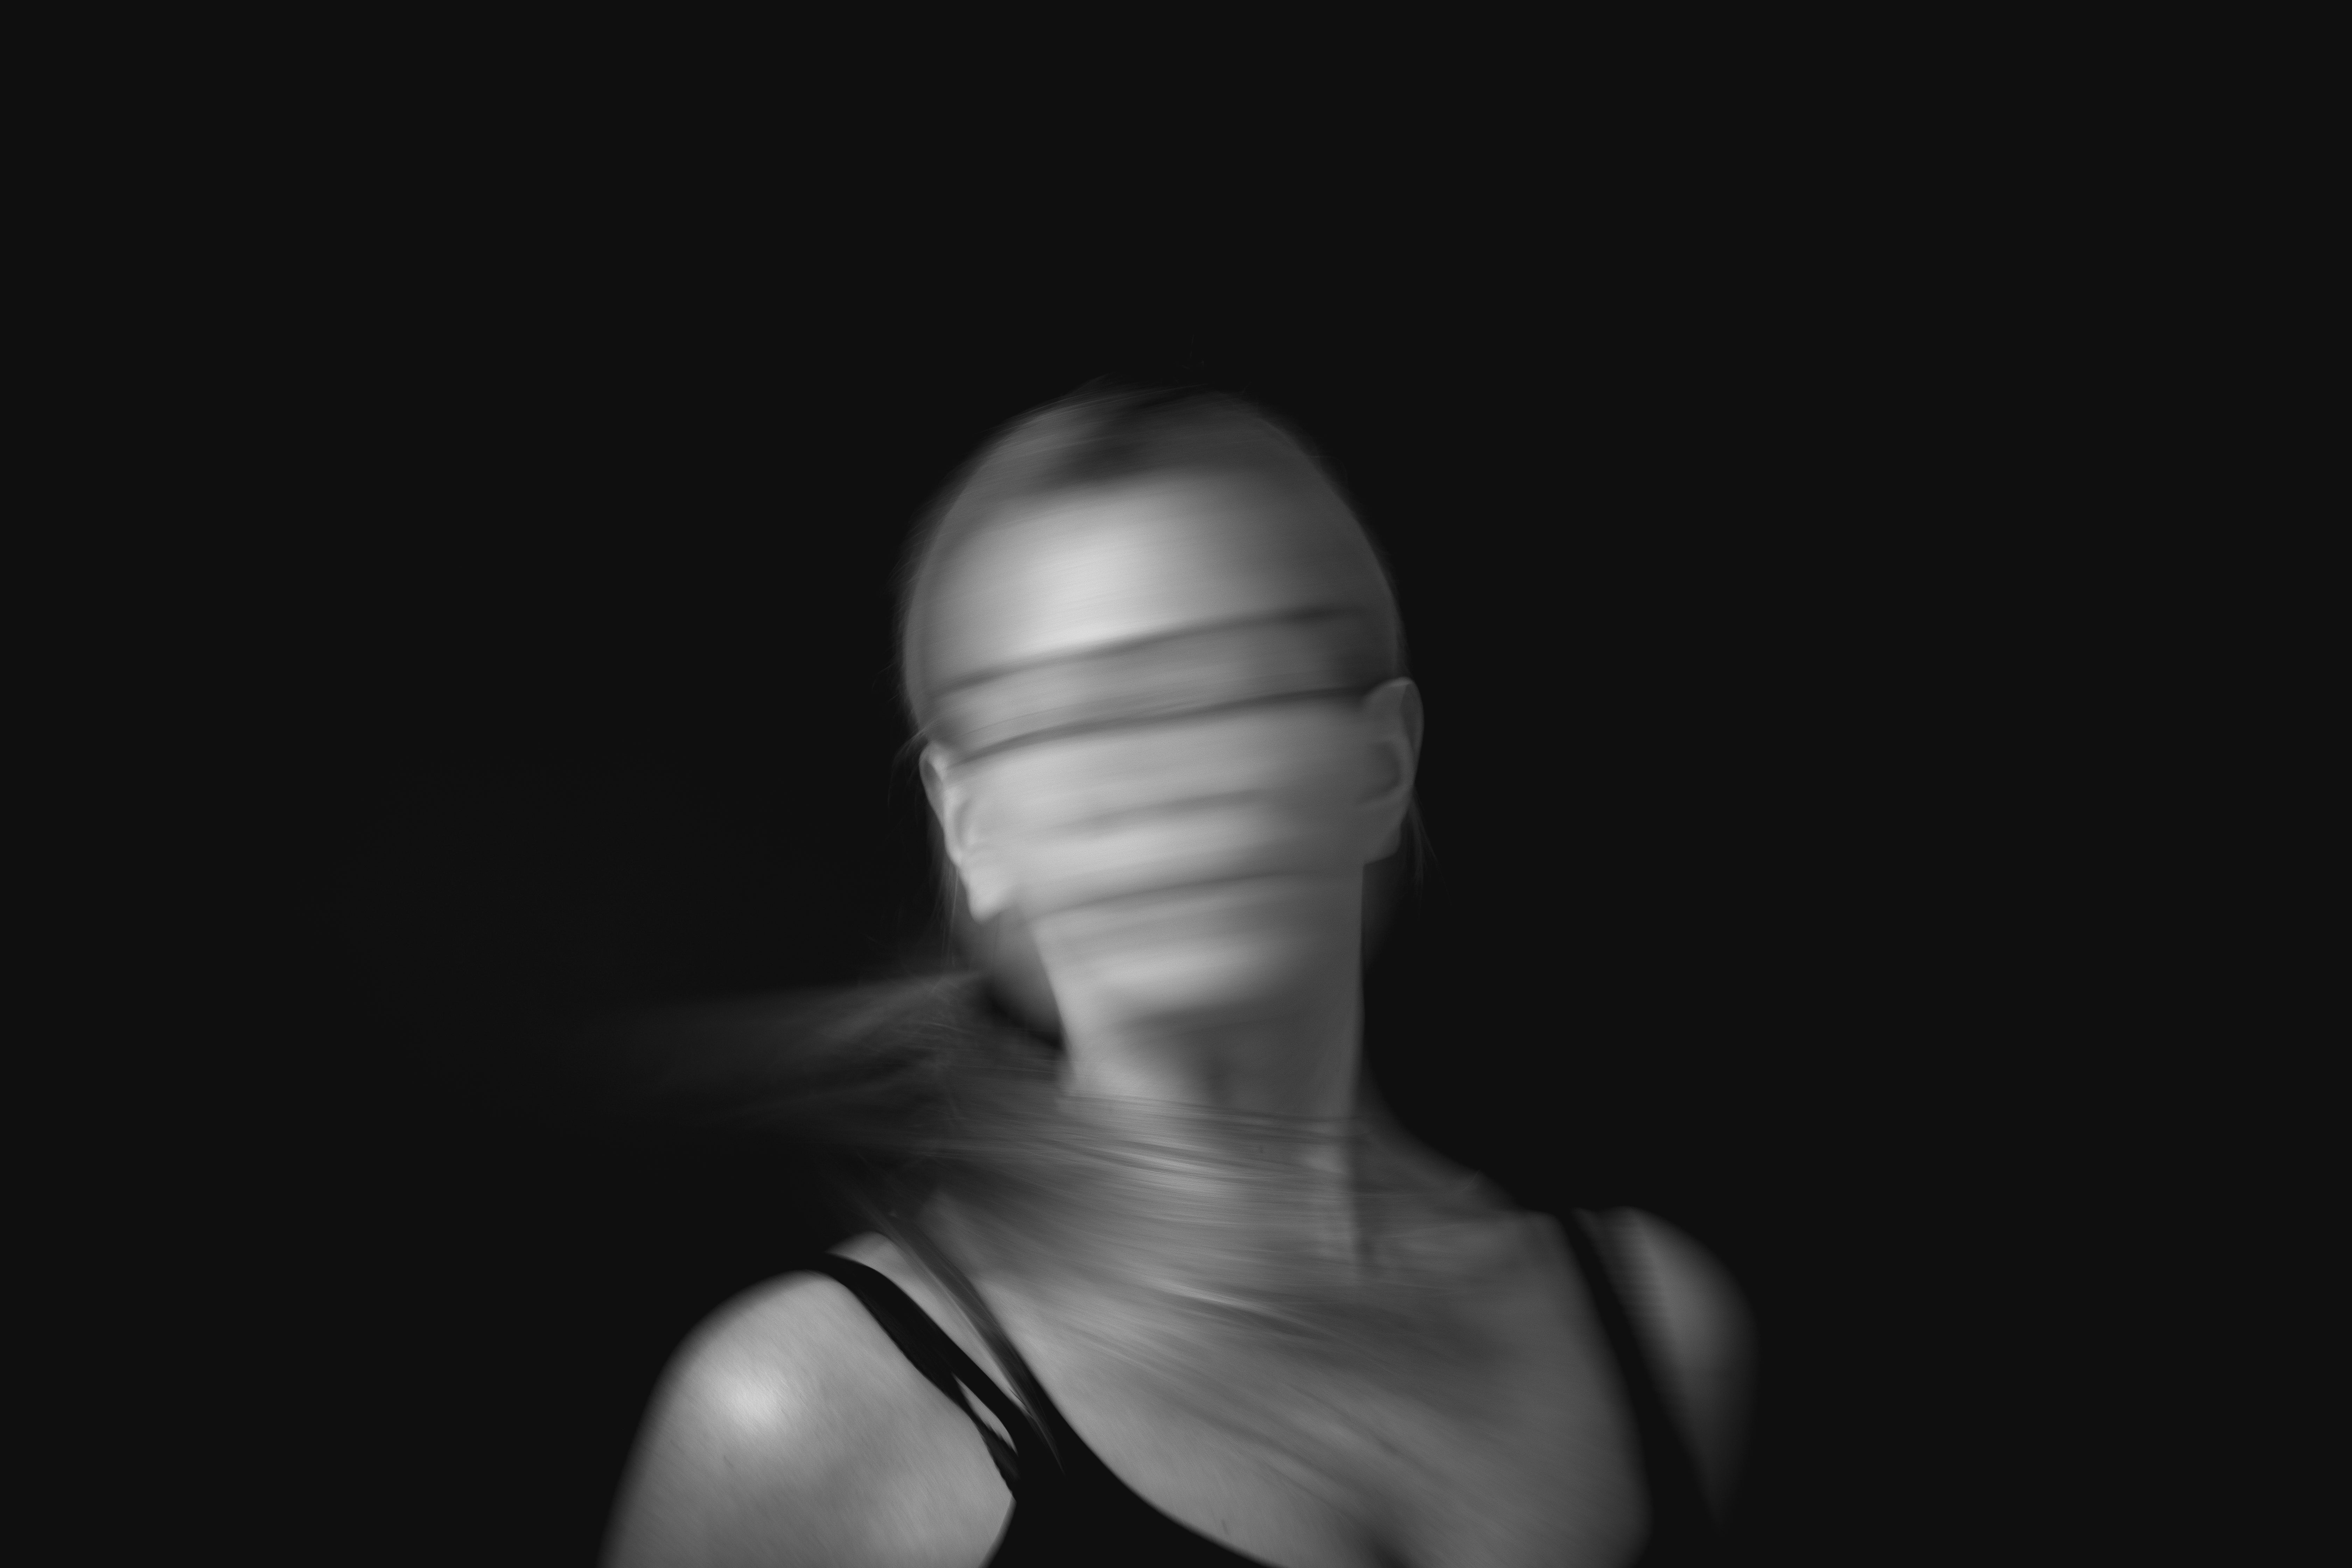 Browse Free HD Images of A Person Moving Their Head Creating Motion Blur